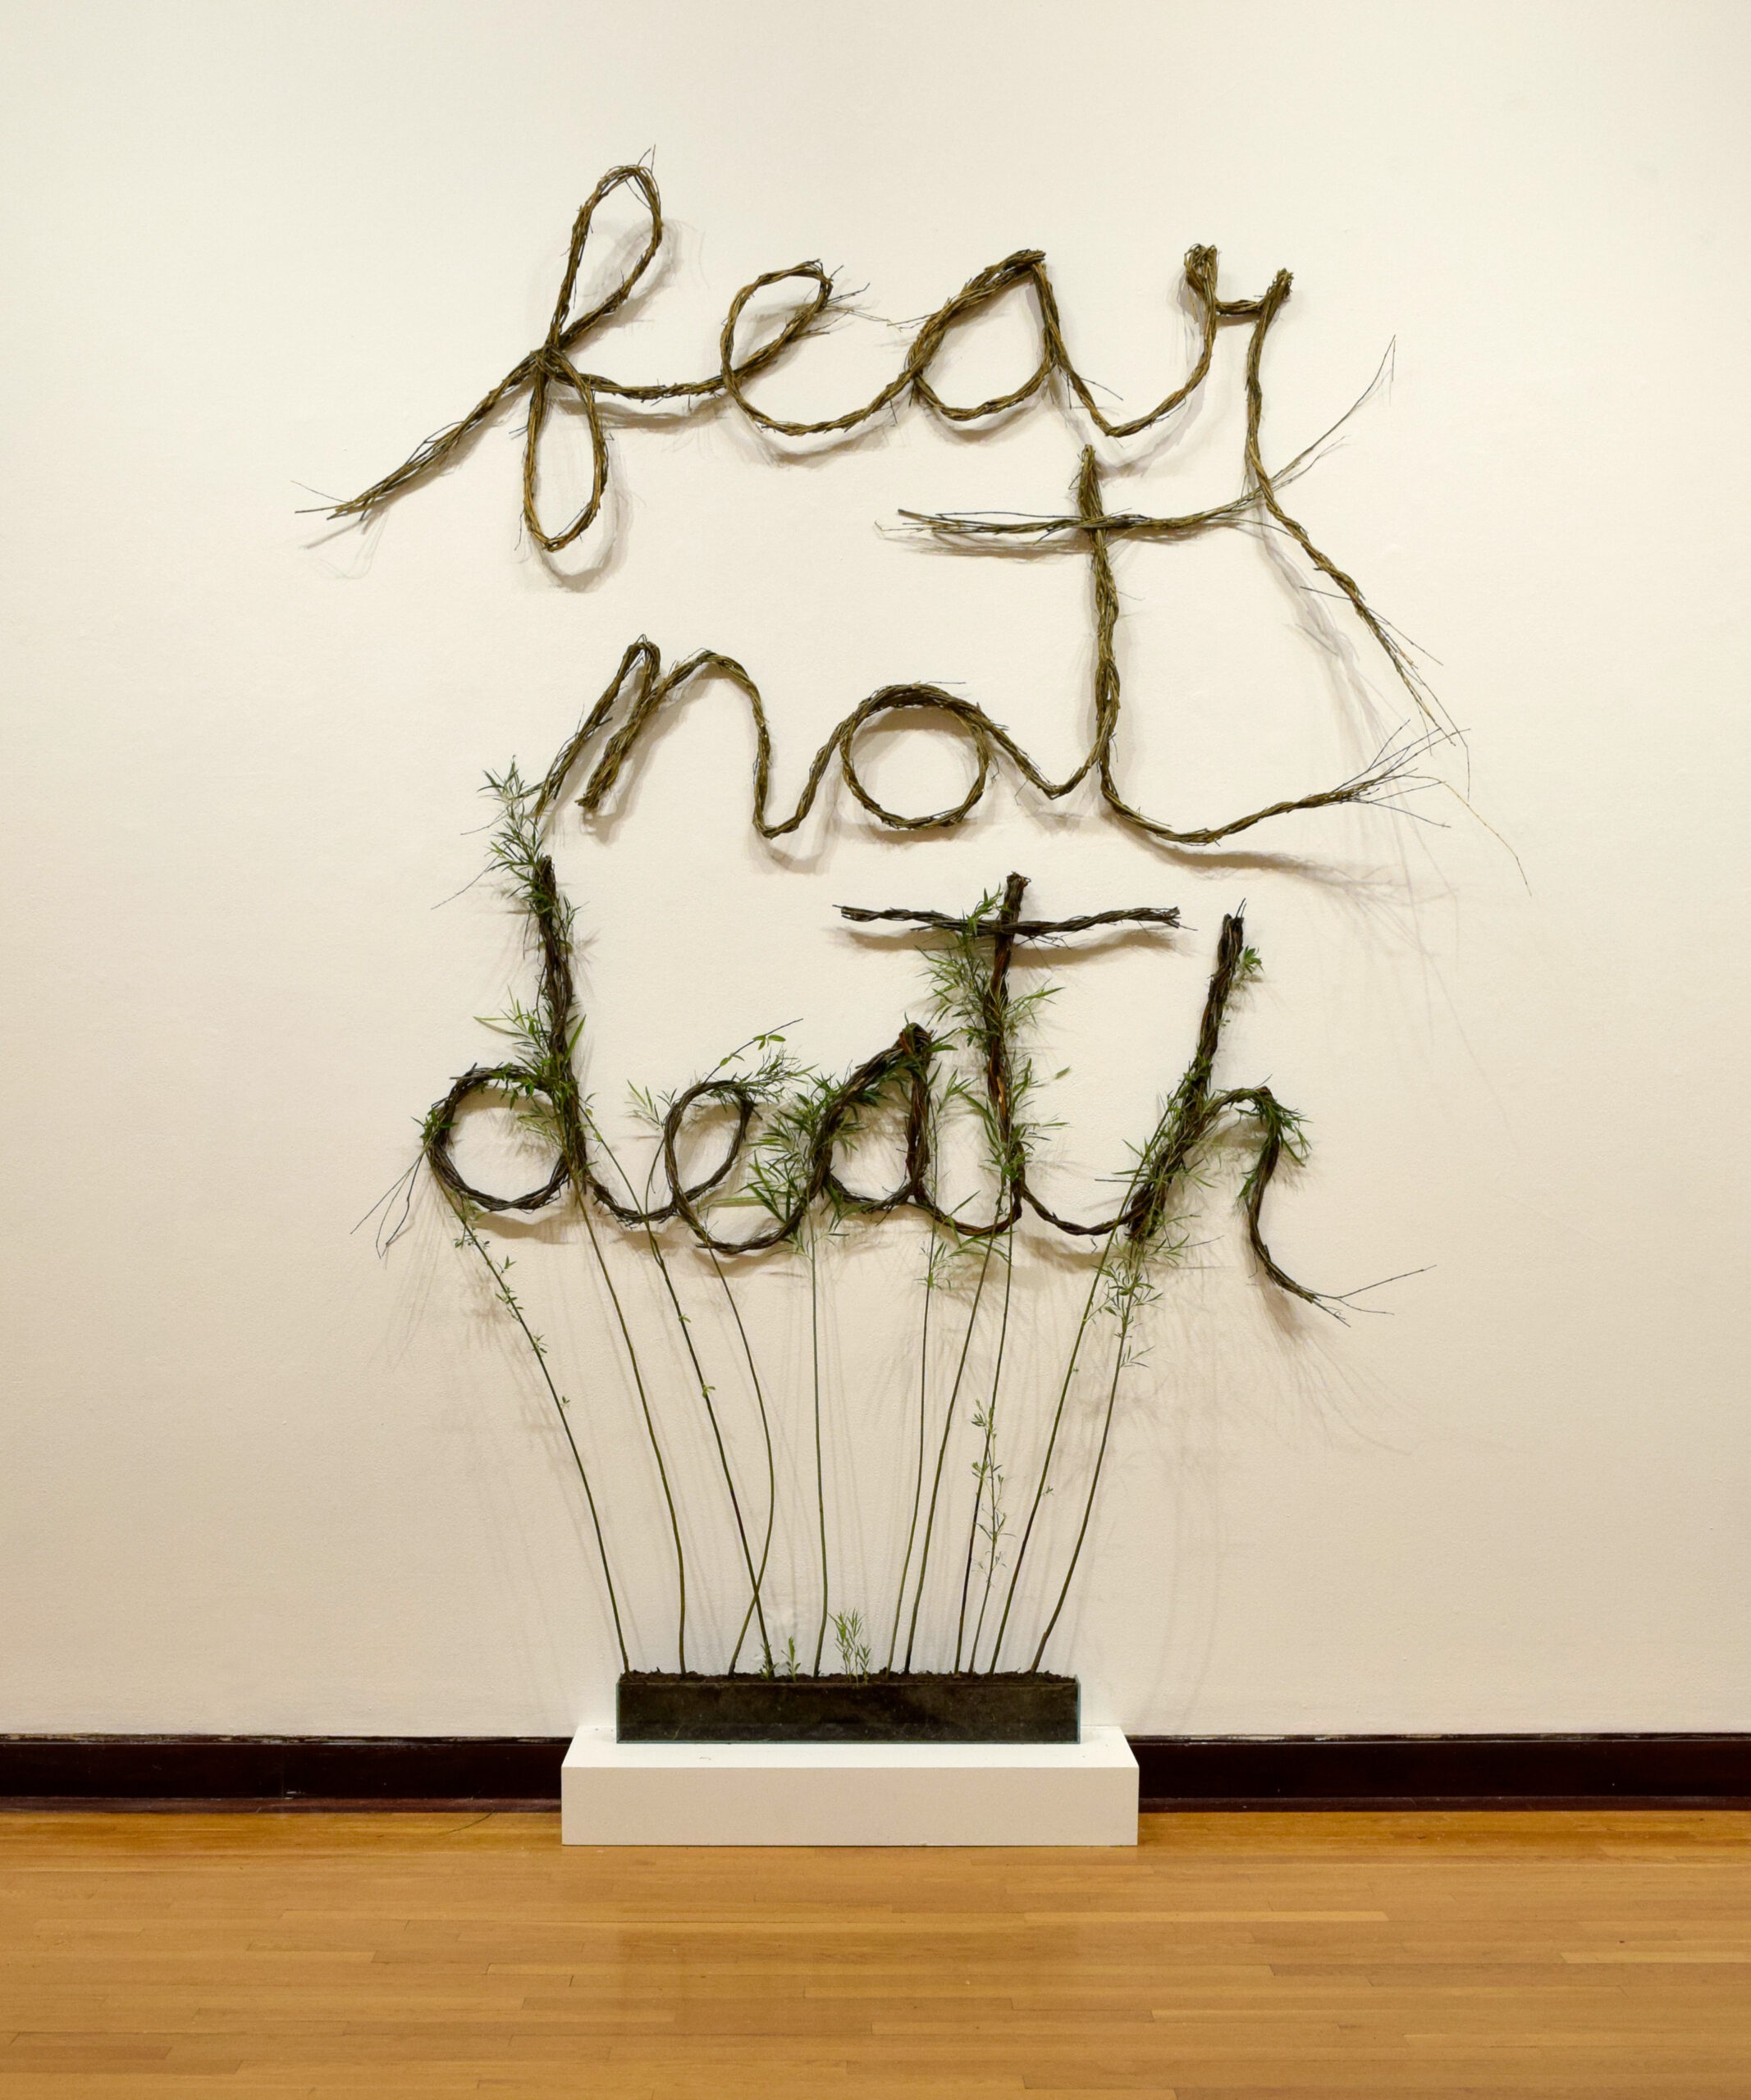 Fear Not Death (Learning from the Willow) 2022. Live willow cuttings, willow rods, soil, stones, water, light.  8’ x 6’ x 14”